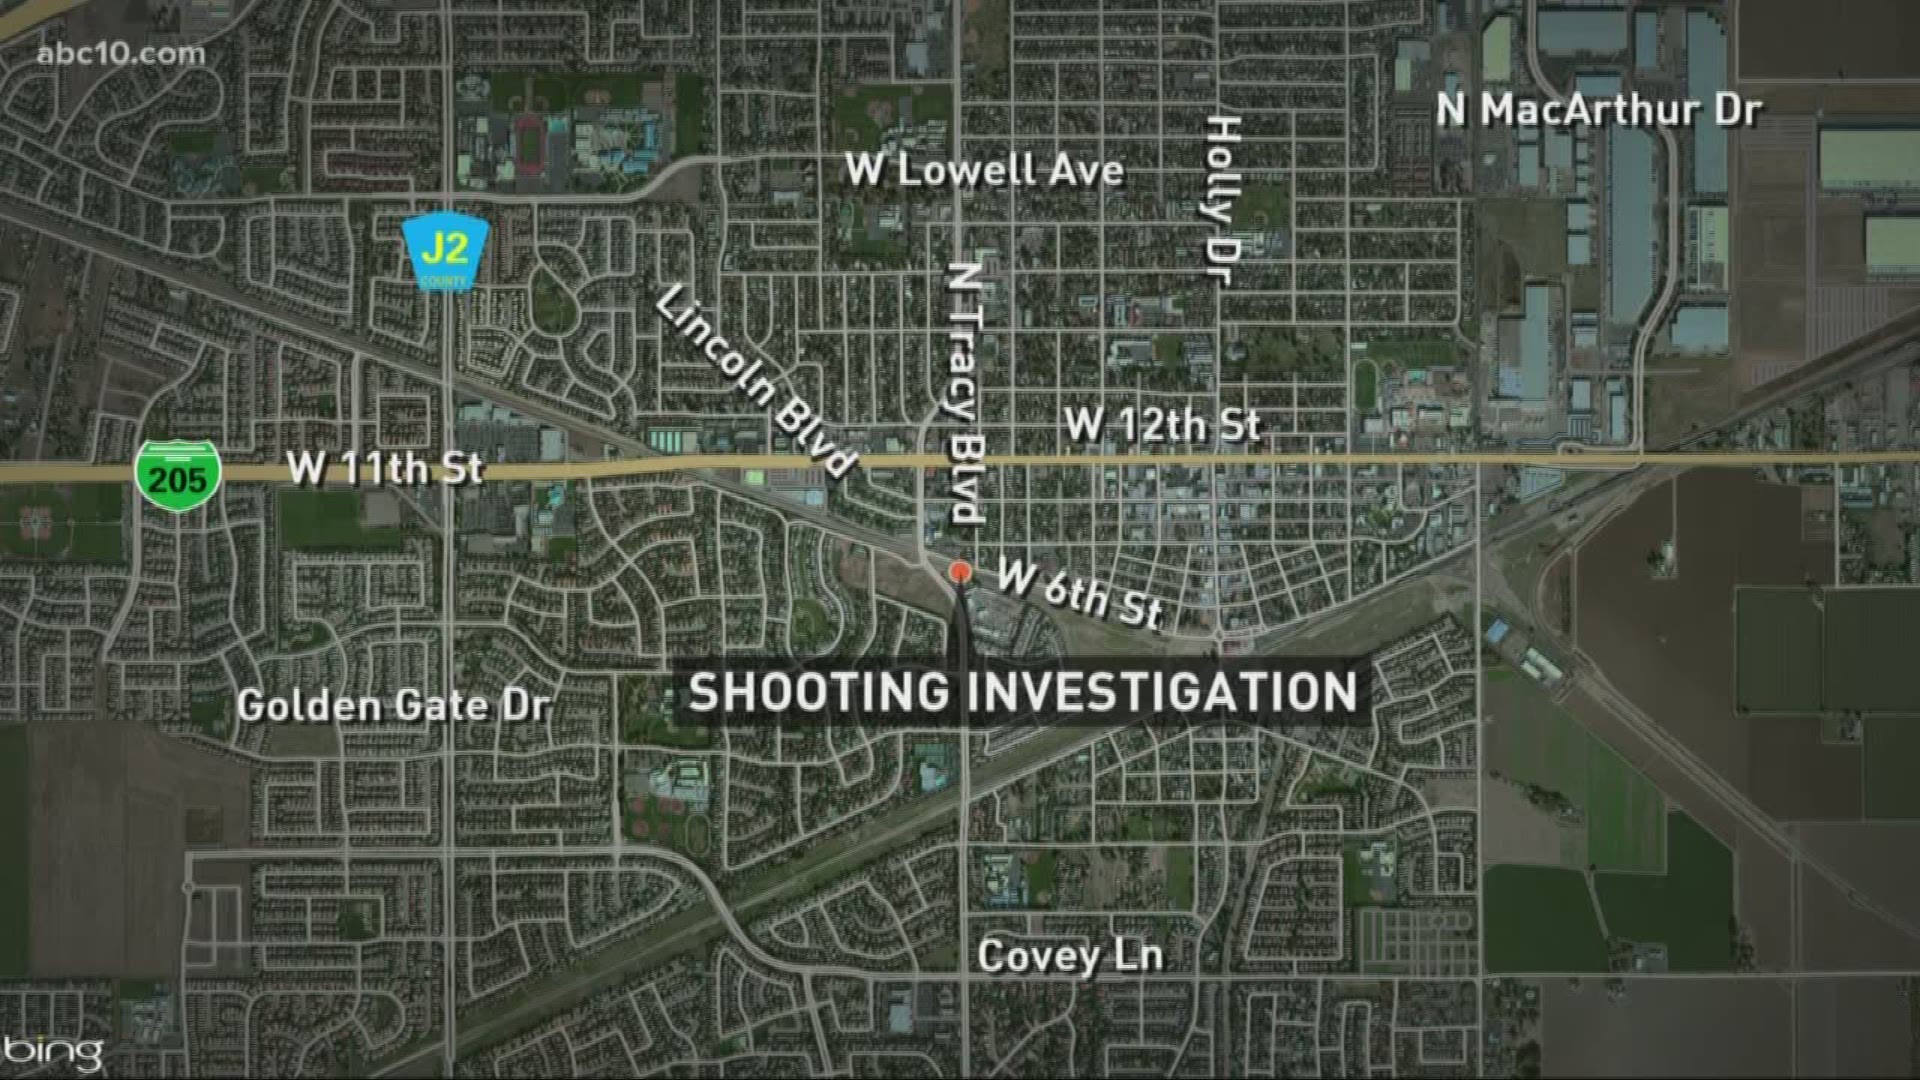 A young boy was killed and four others were injured Thursday night after a shooting in Tracy, according to Tracy police officials.